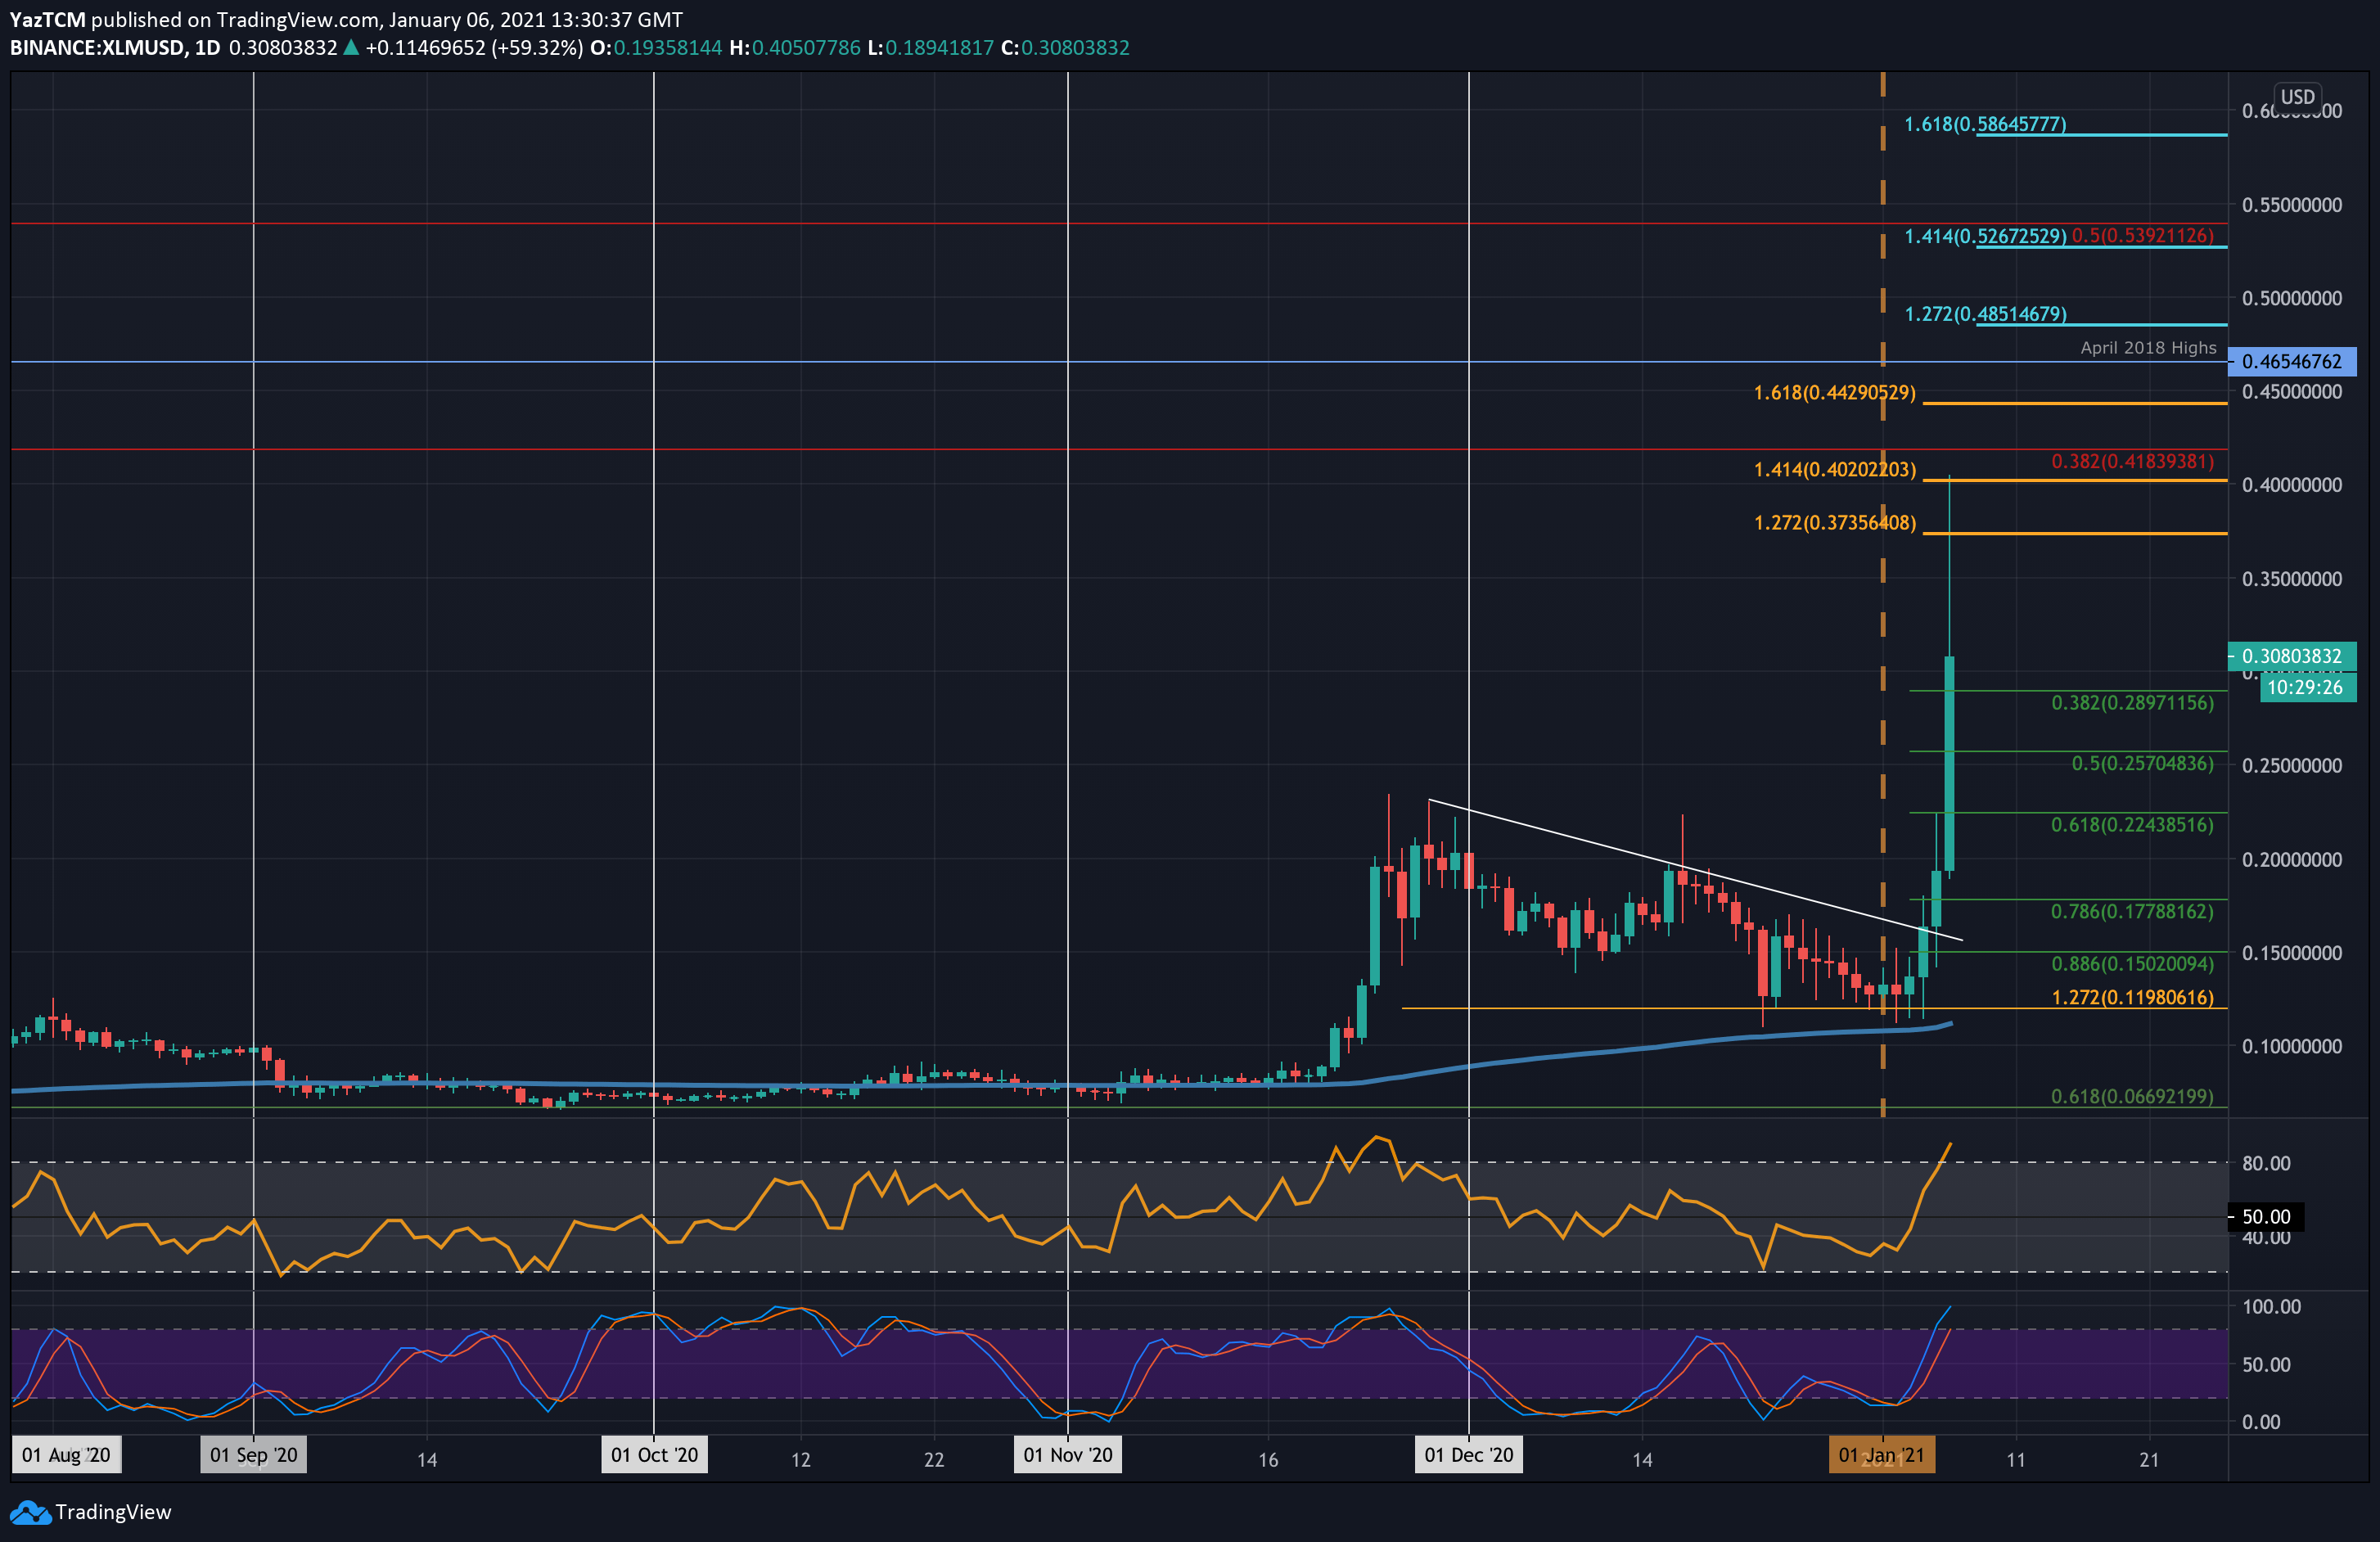 stellar-price-analysis-xlm-goes-parabolic-with-100-daily-surge-whats-the-next-target